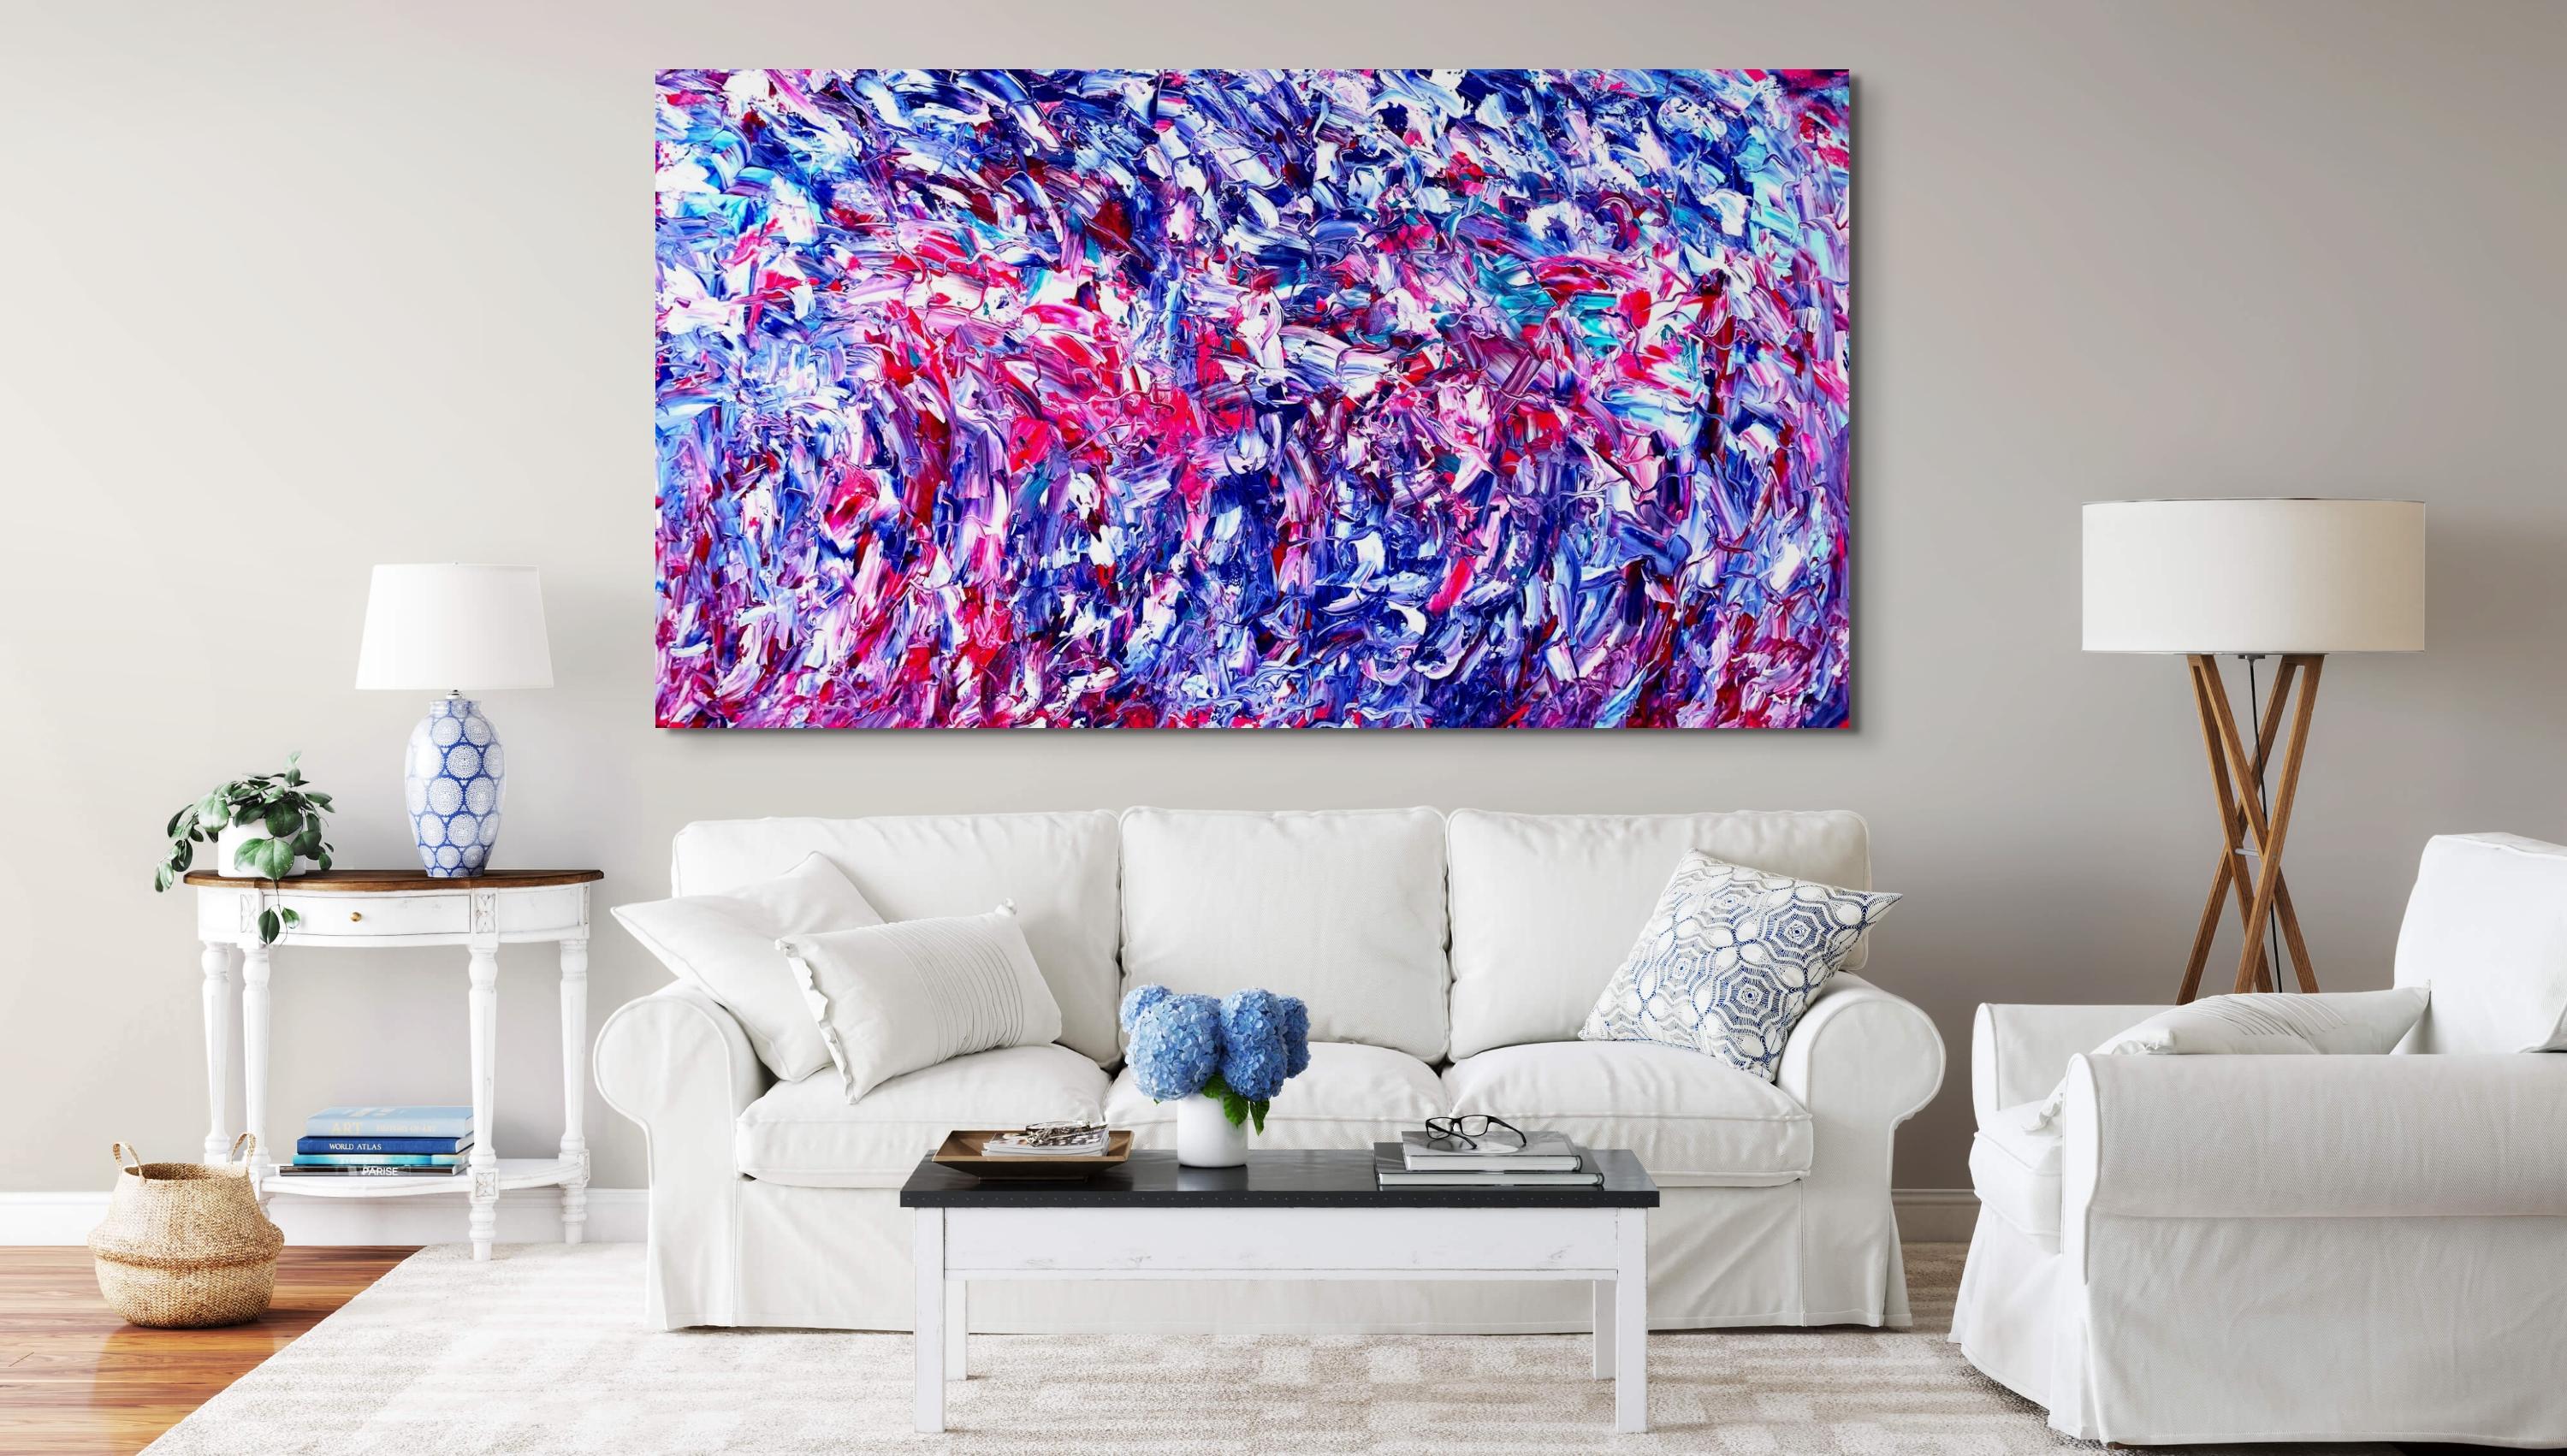 Beyond This Moment - Abstract Expressionist Painting by Estelle Asmodelle